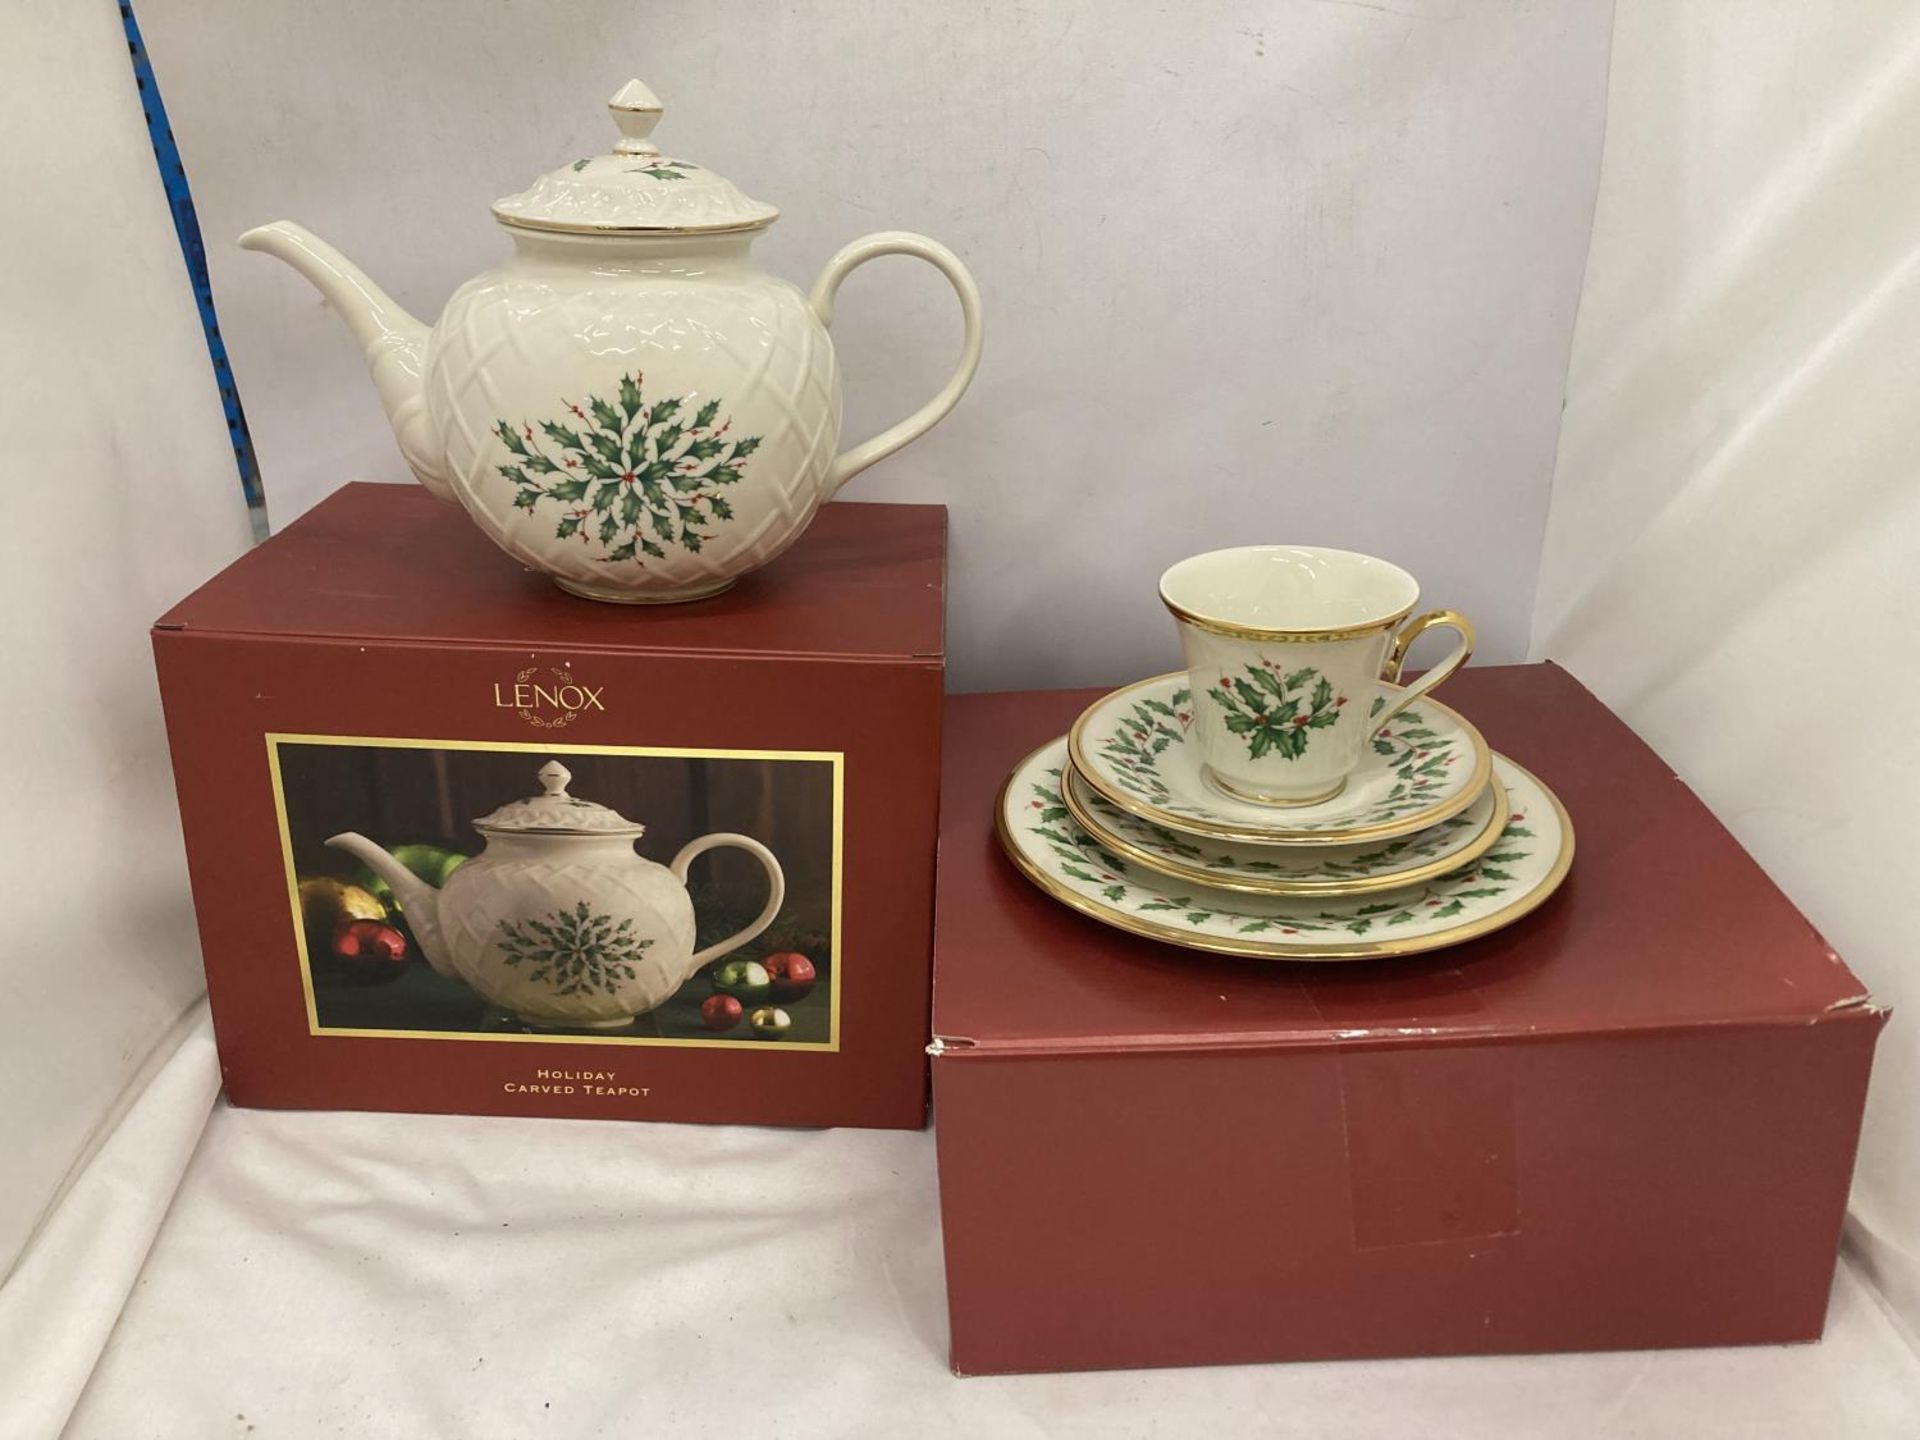 A LENNOX 'HOLIDAY' TEAPOT AS NEW IN BOX PLUS A LENNOX QUAD SET 'HOLIDAY' AS NEW IN BOX